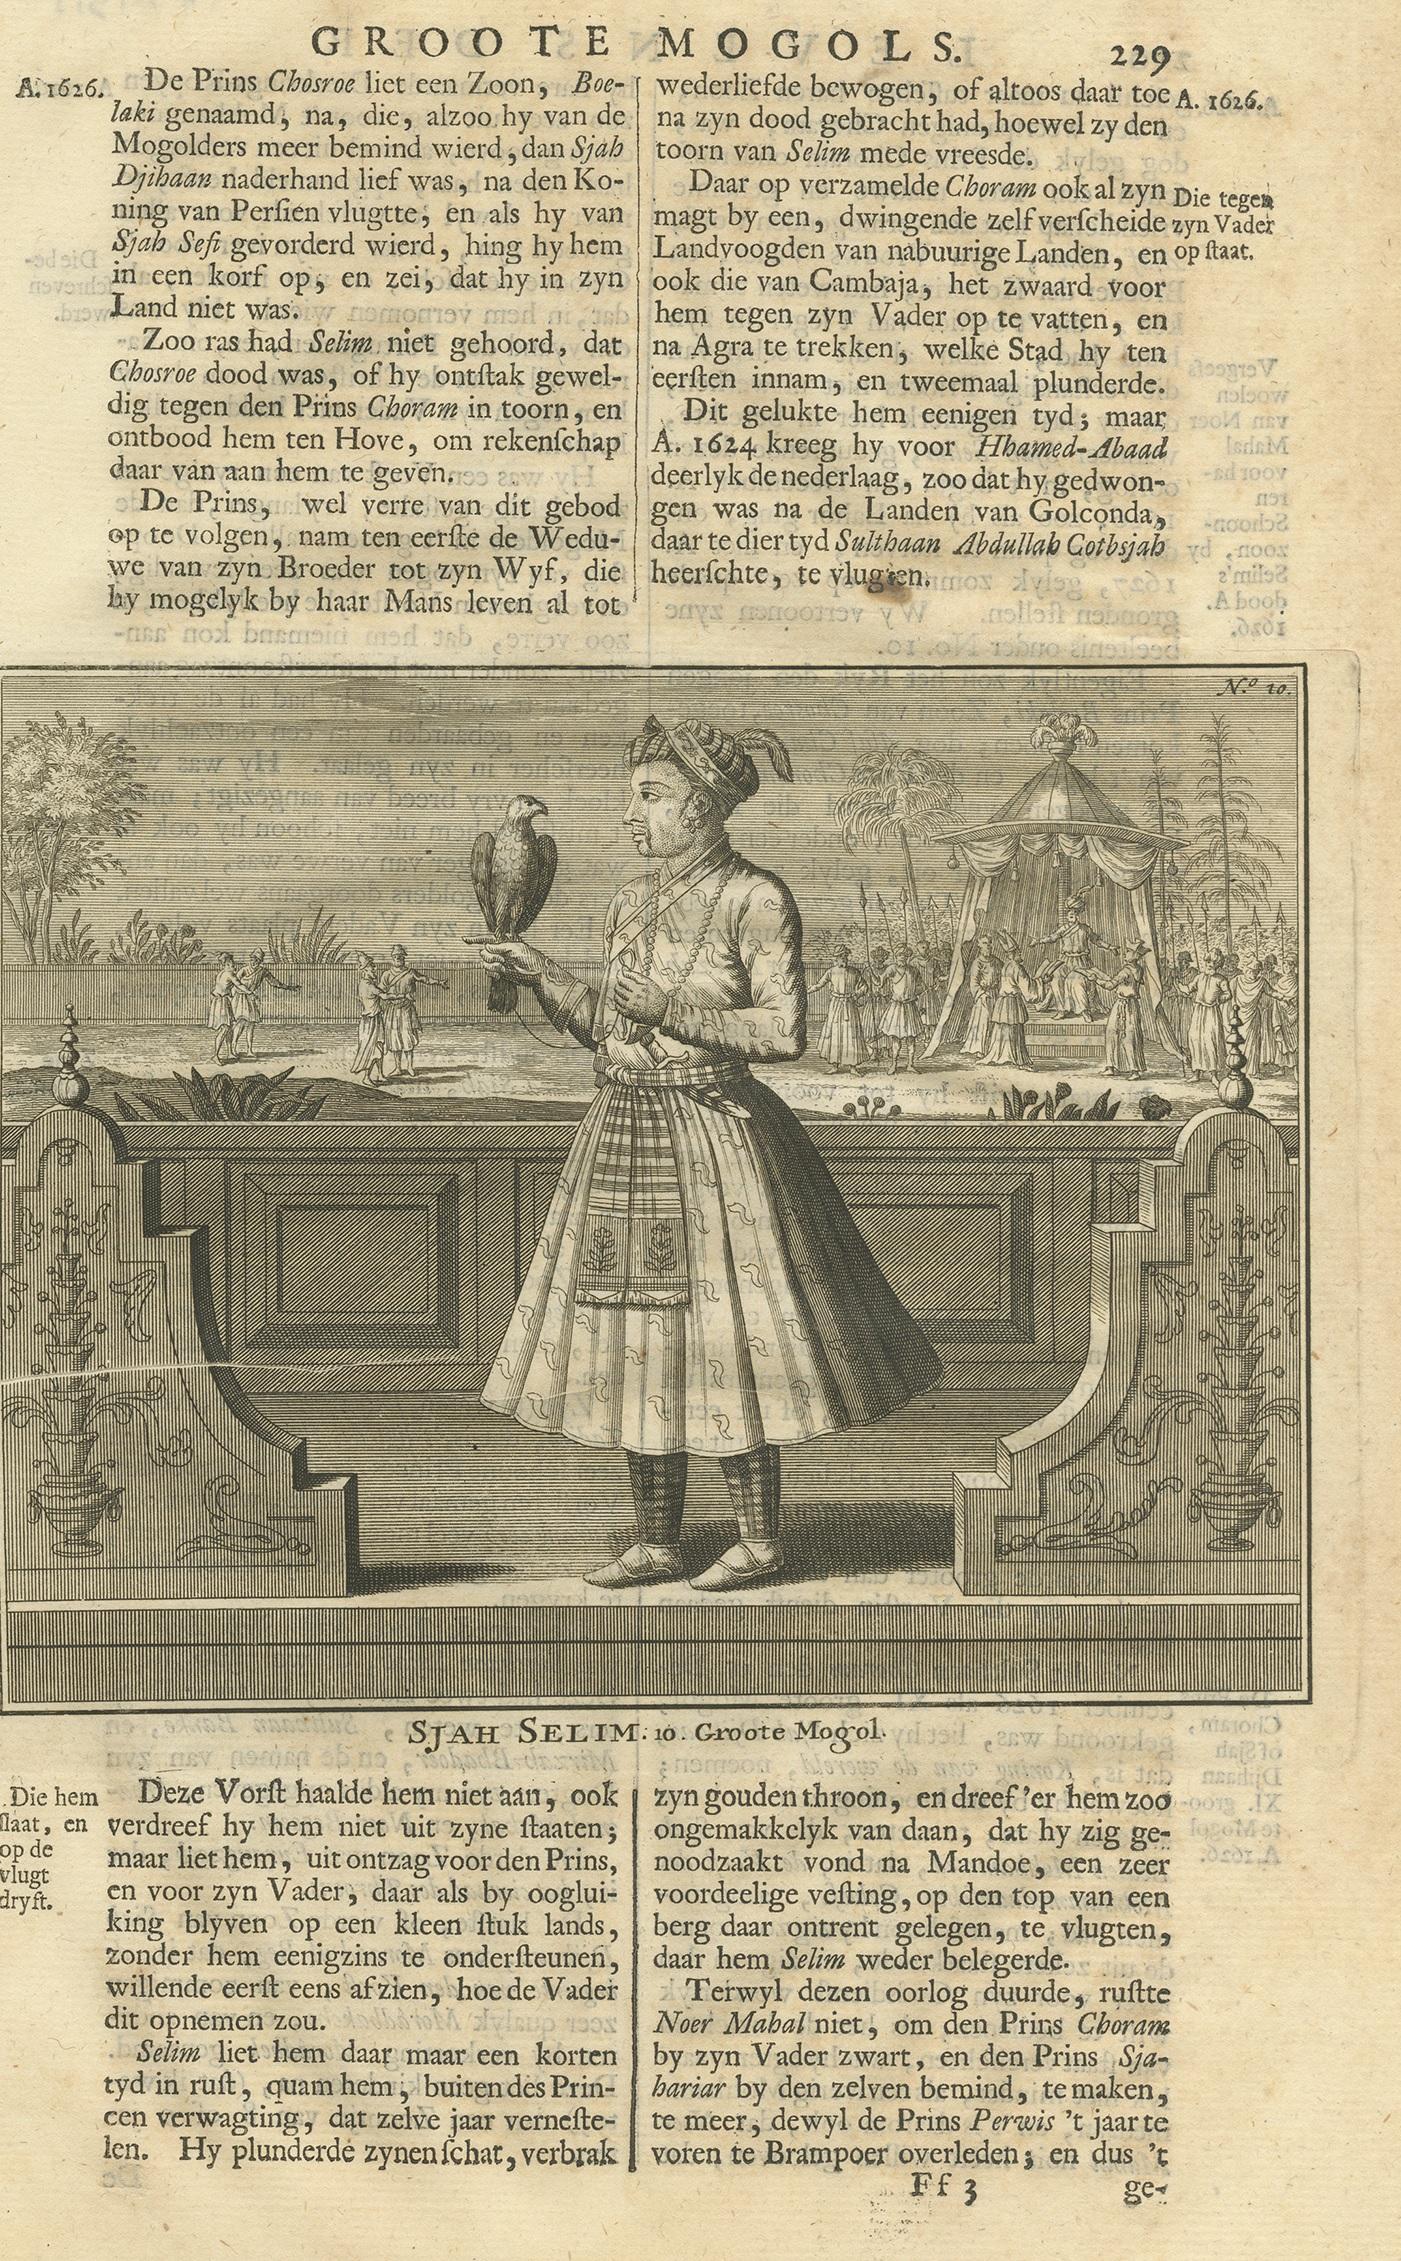 Antique print titled 'Sjah Selim, 10. Groote Mogol'. This print depicts Rafi ud-Darajat, the 10th Mughal Emperor. Text on verso. This print originates from 'Oud en Nieuw Oost-Indiën' by F. Valentijn.